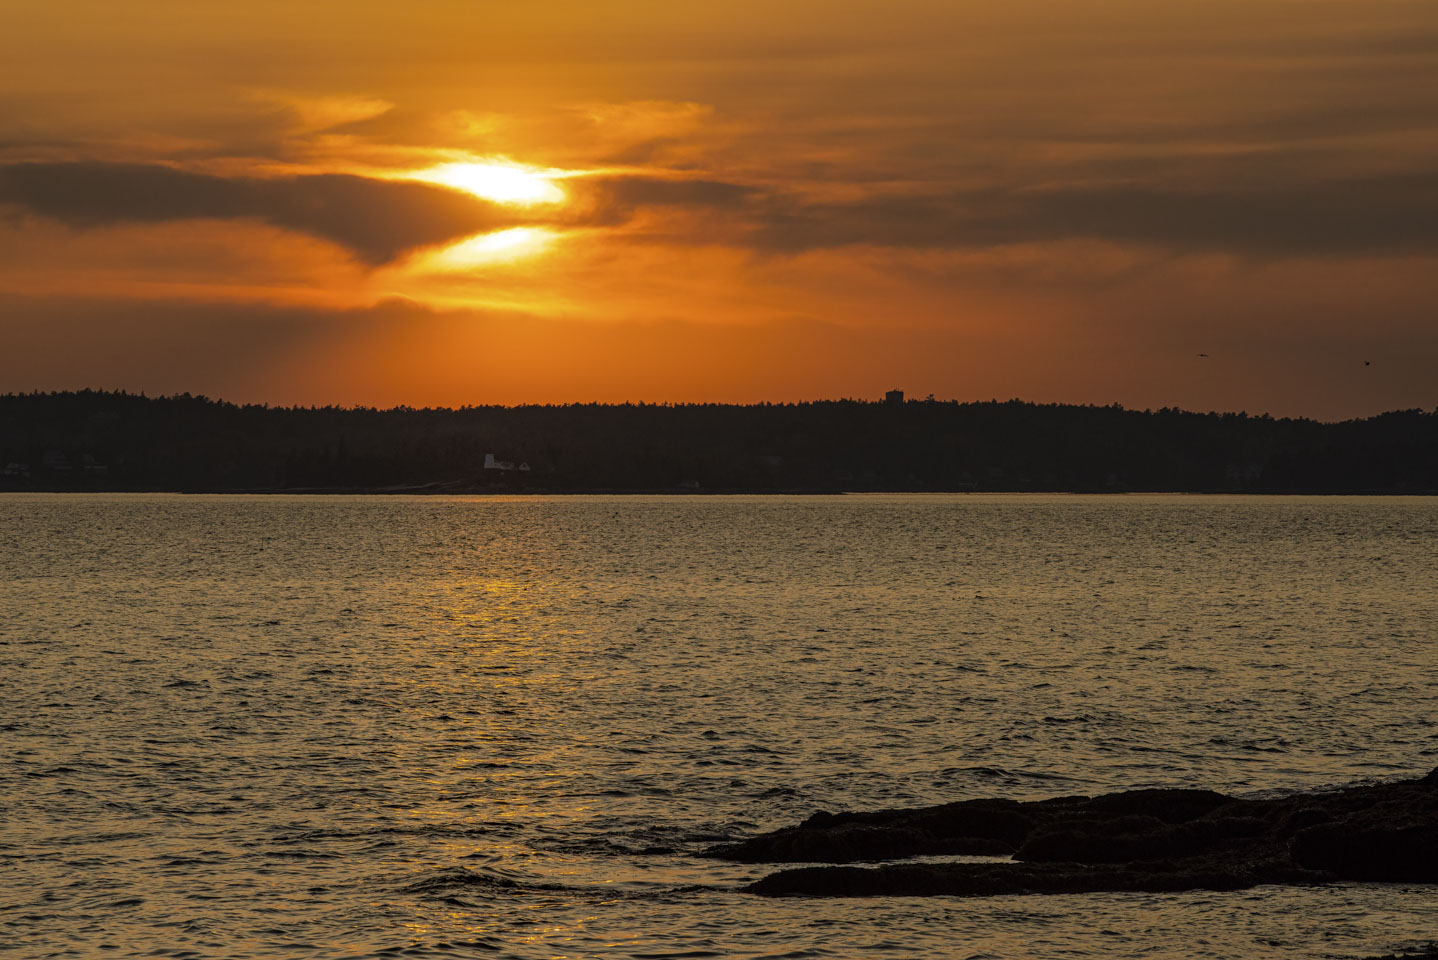 The sun is bisected by clouds, and Brant Rock Lighthouse is visible